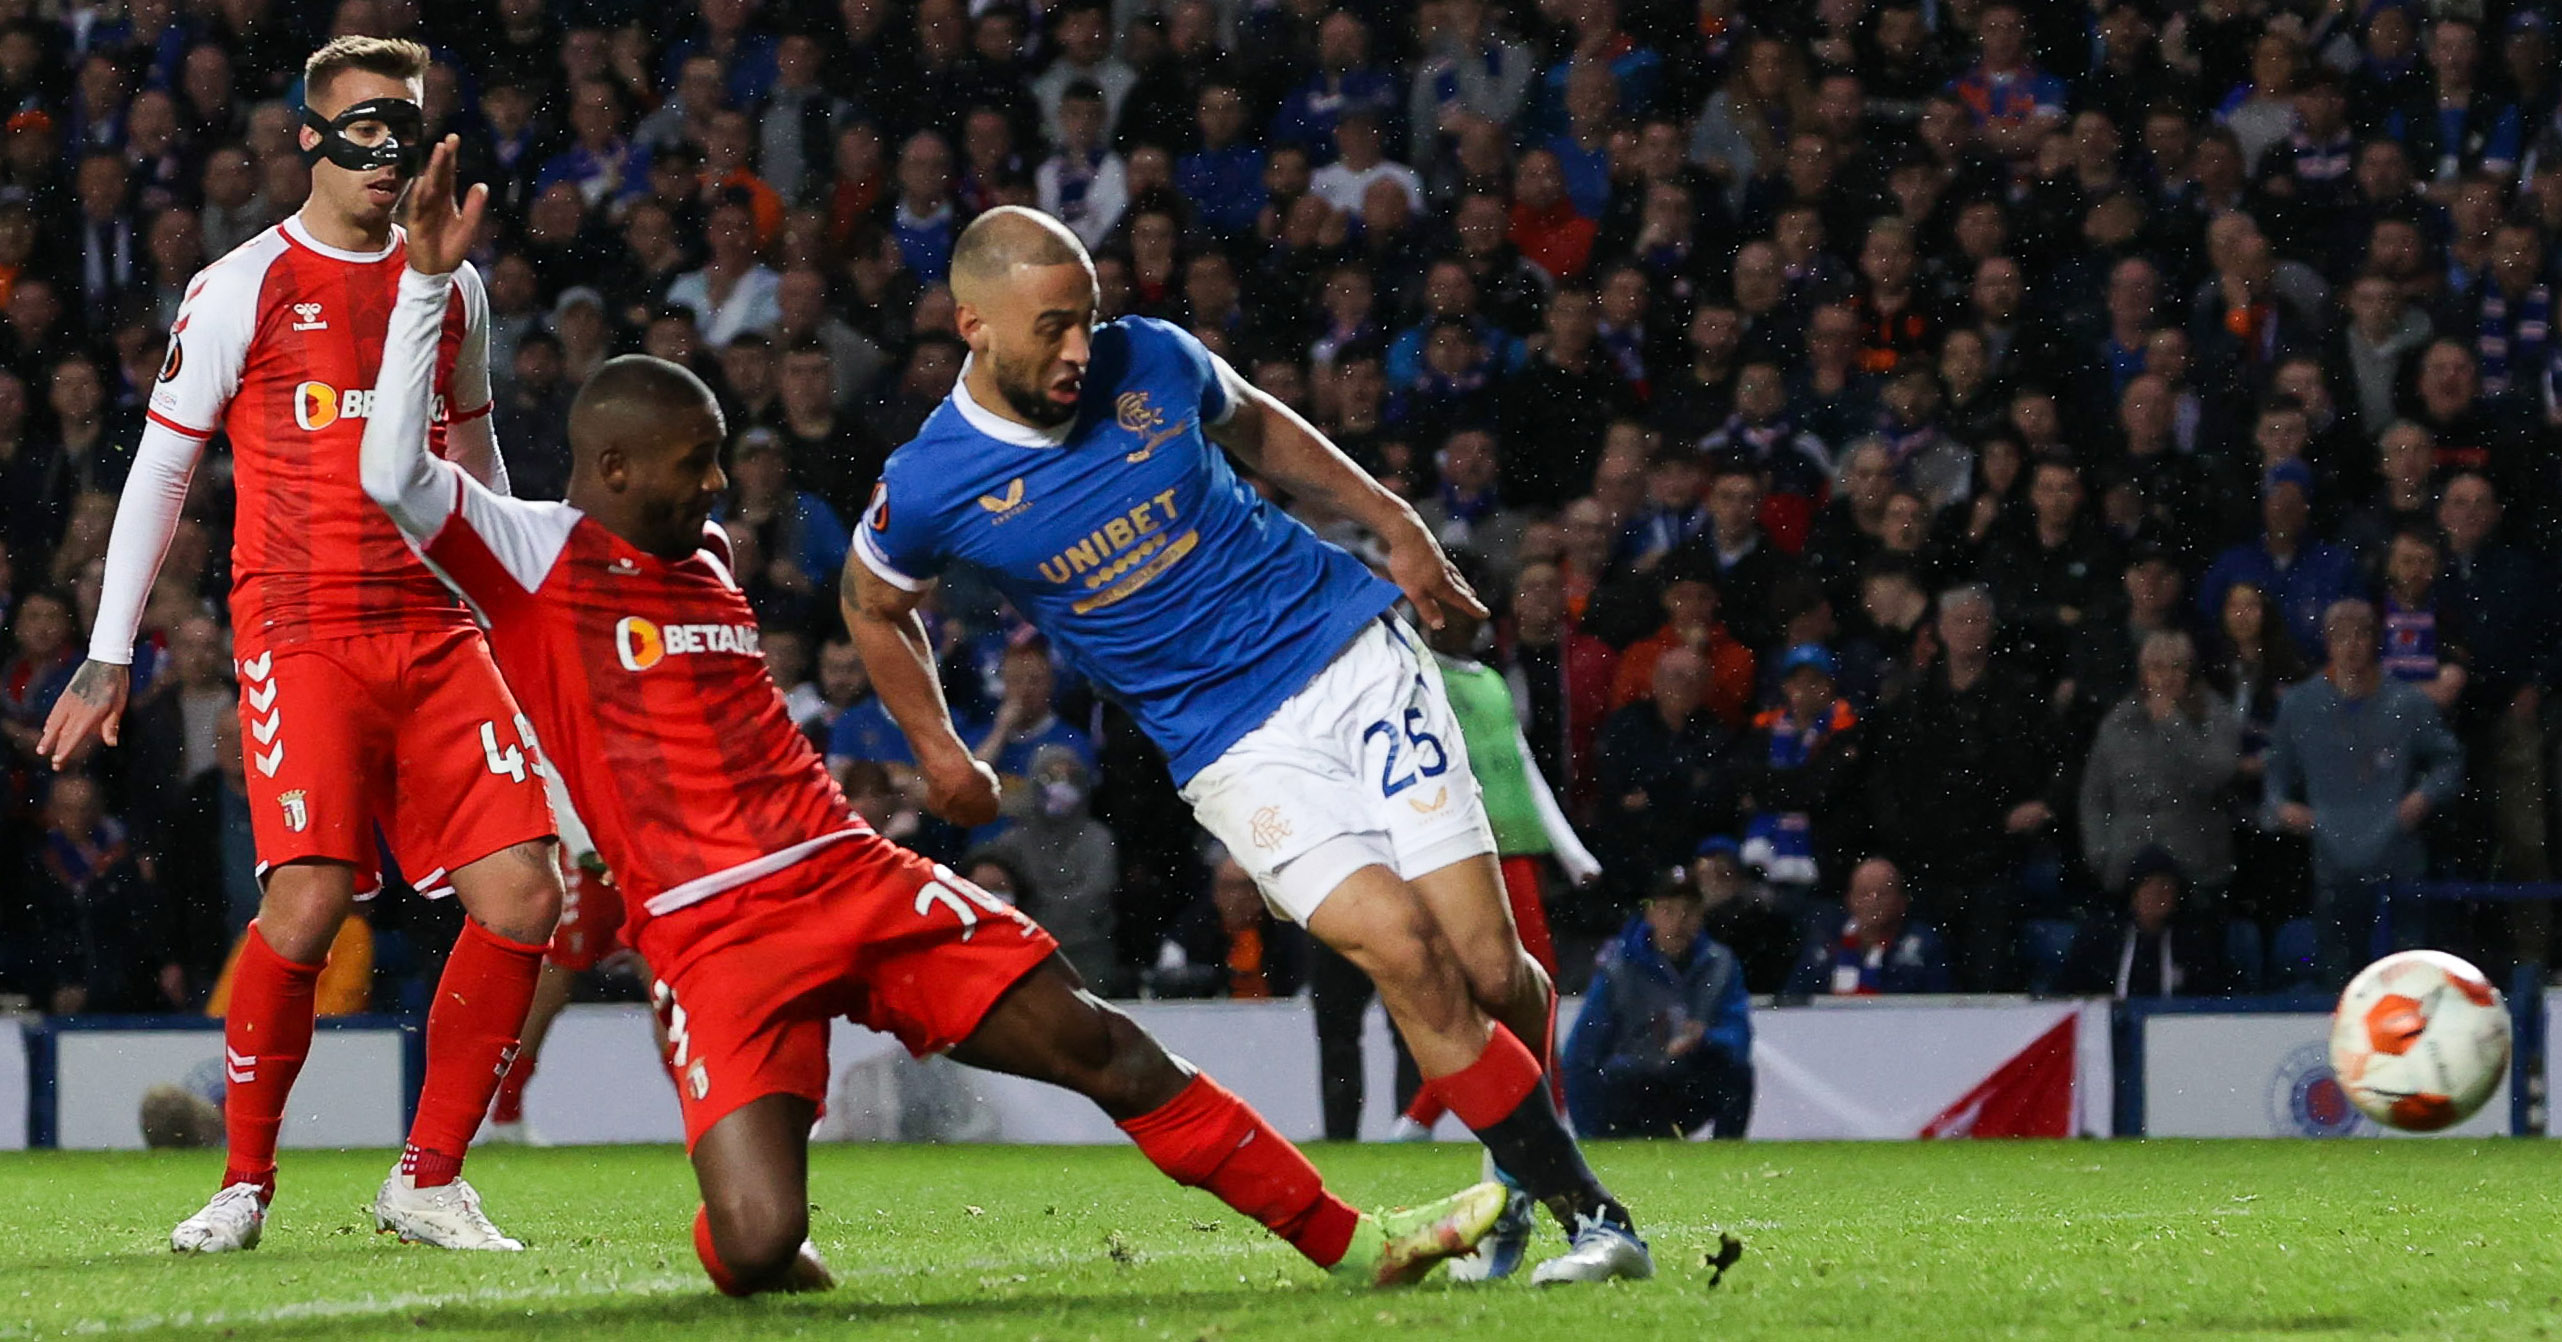 Kemar Roofe scores in extra time to put Rangers 3-1 up against Braga.